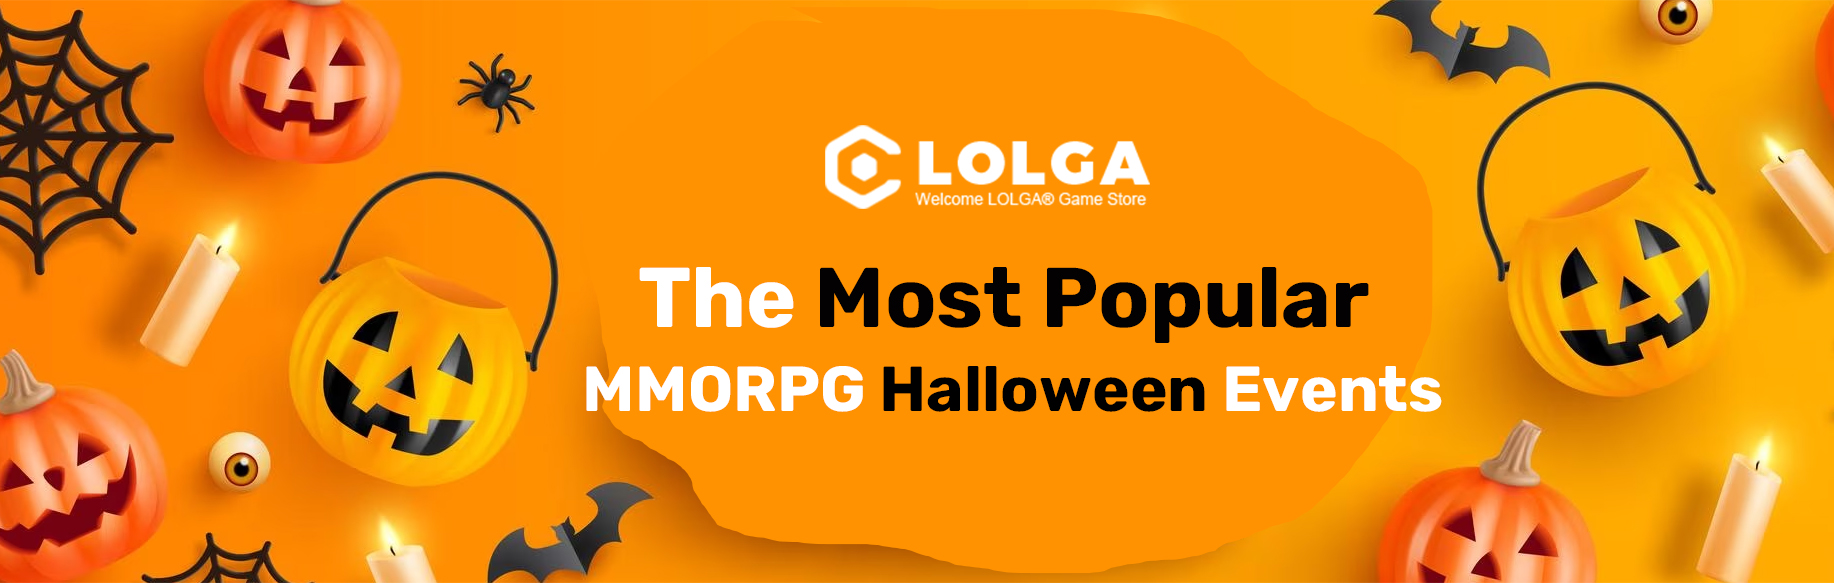 The Most Popular MMORPG Halloween Events